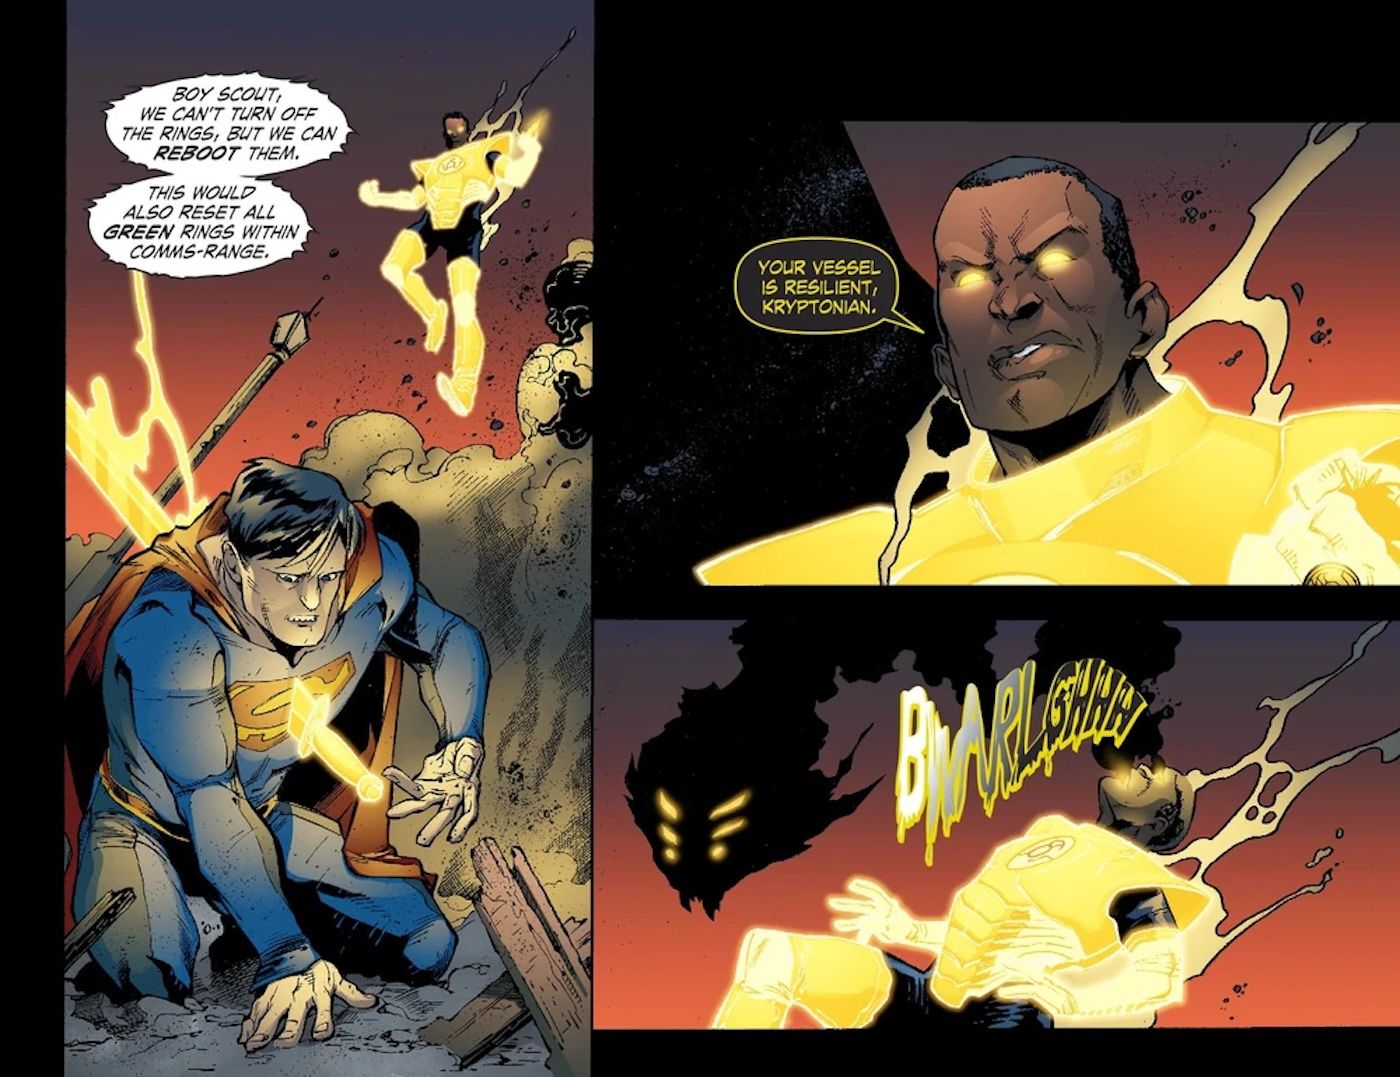 Comic book panels: Superman with a yellow knife in his chest. Parallax leaves John Stewart's body.